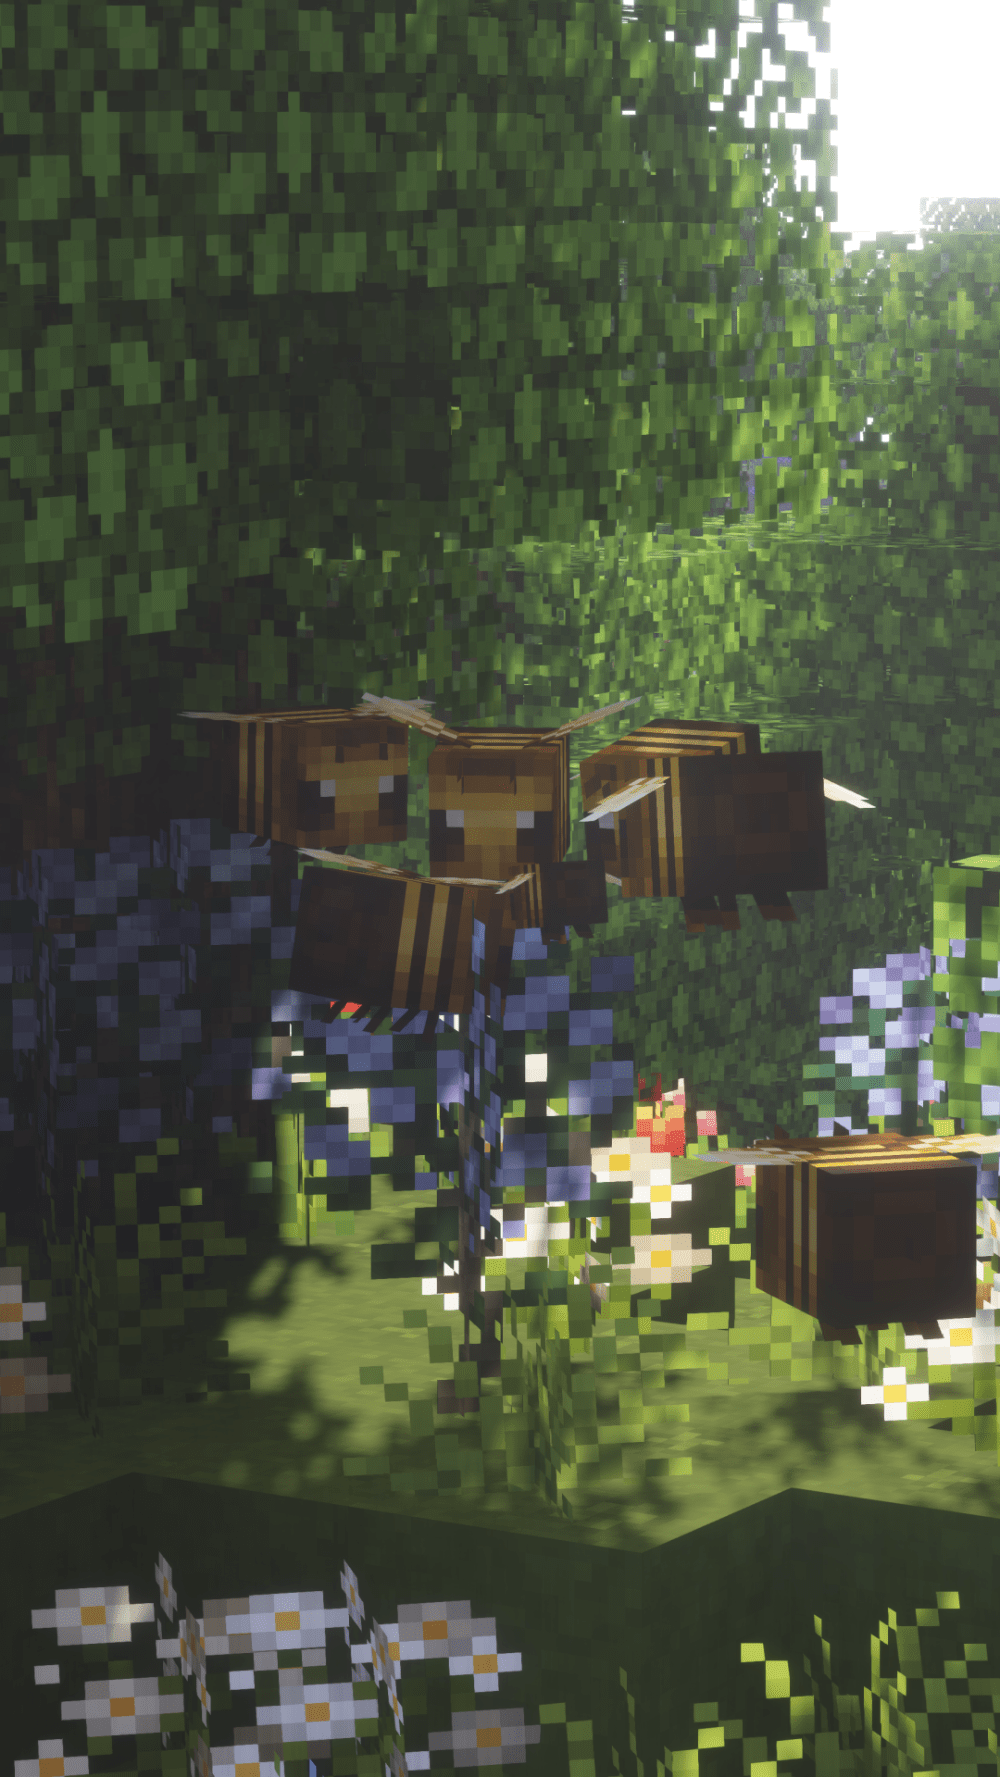 A Minecraft screenshot of a grassy area with a beehive hanging from a tree. - Minecraft